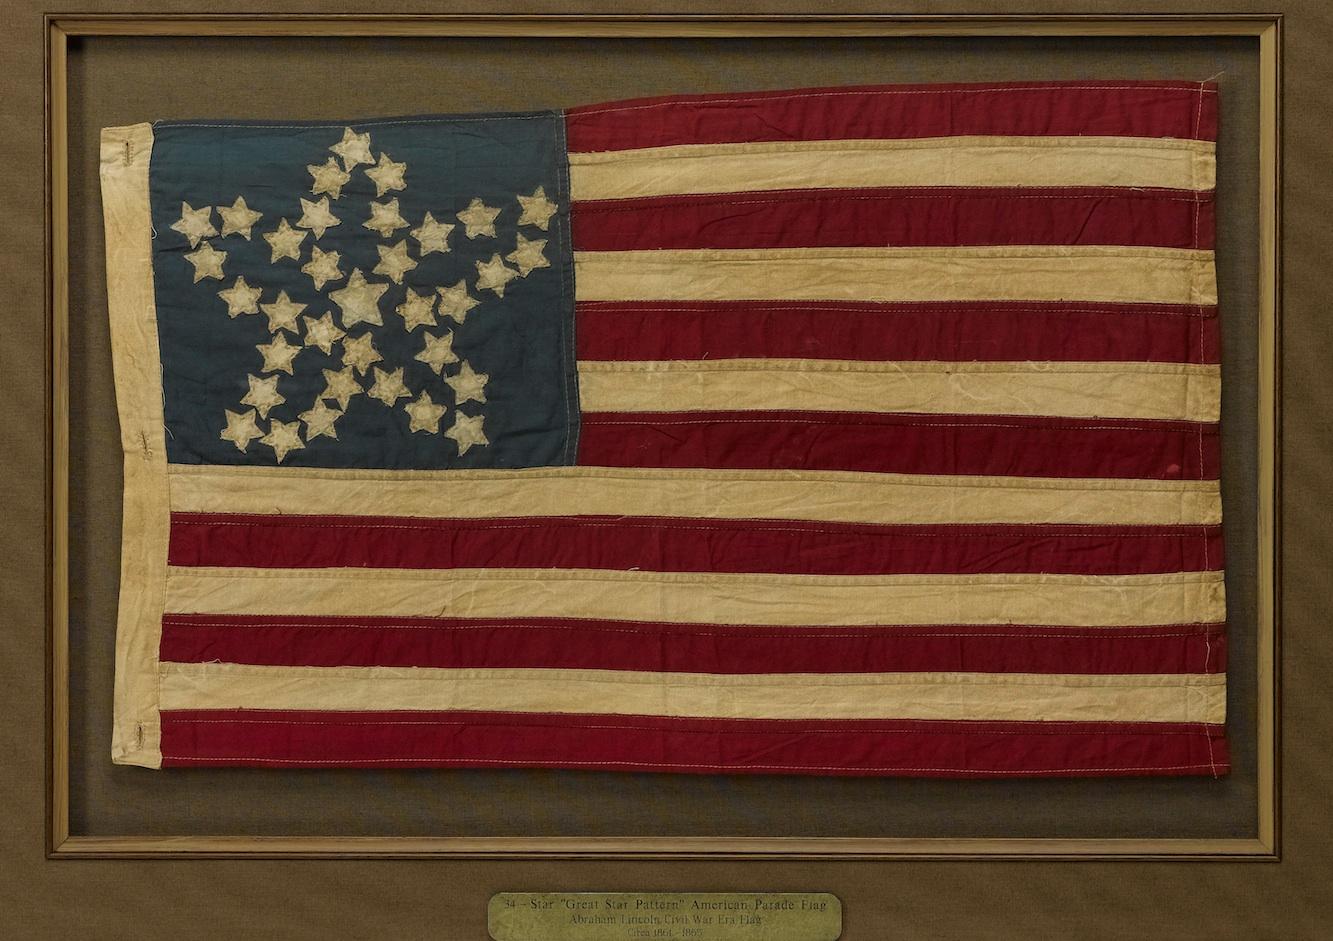 This is a 20th century commemorative flag with 34 stars in recognition of when Kansas was admitted into the Union. Kansas was admitted to the Union on January 29th, 1861, about two-and-a-half months before the first shots of the civil war were